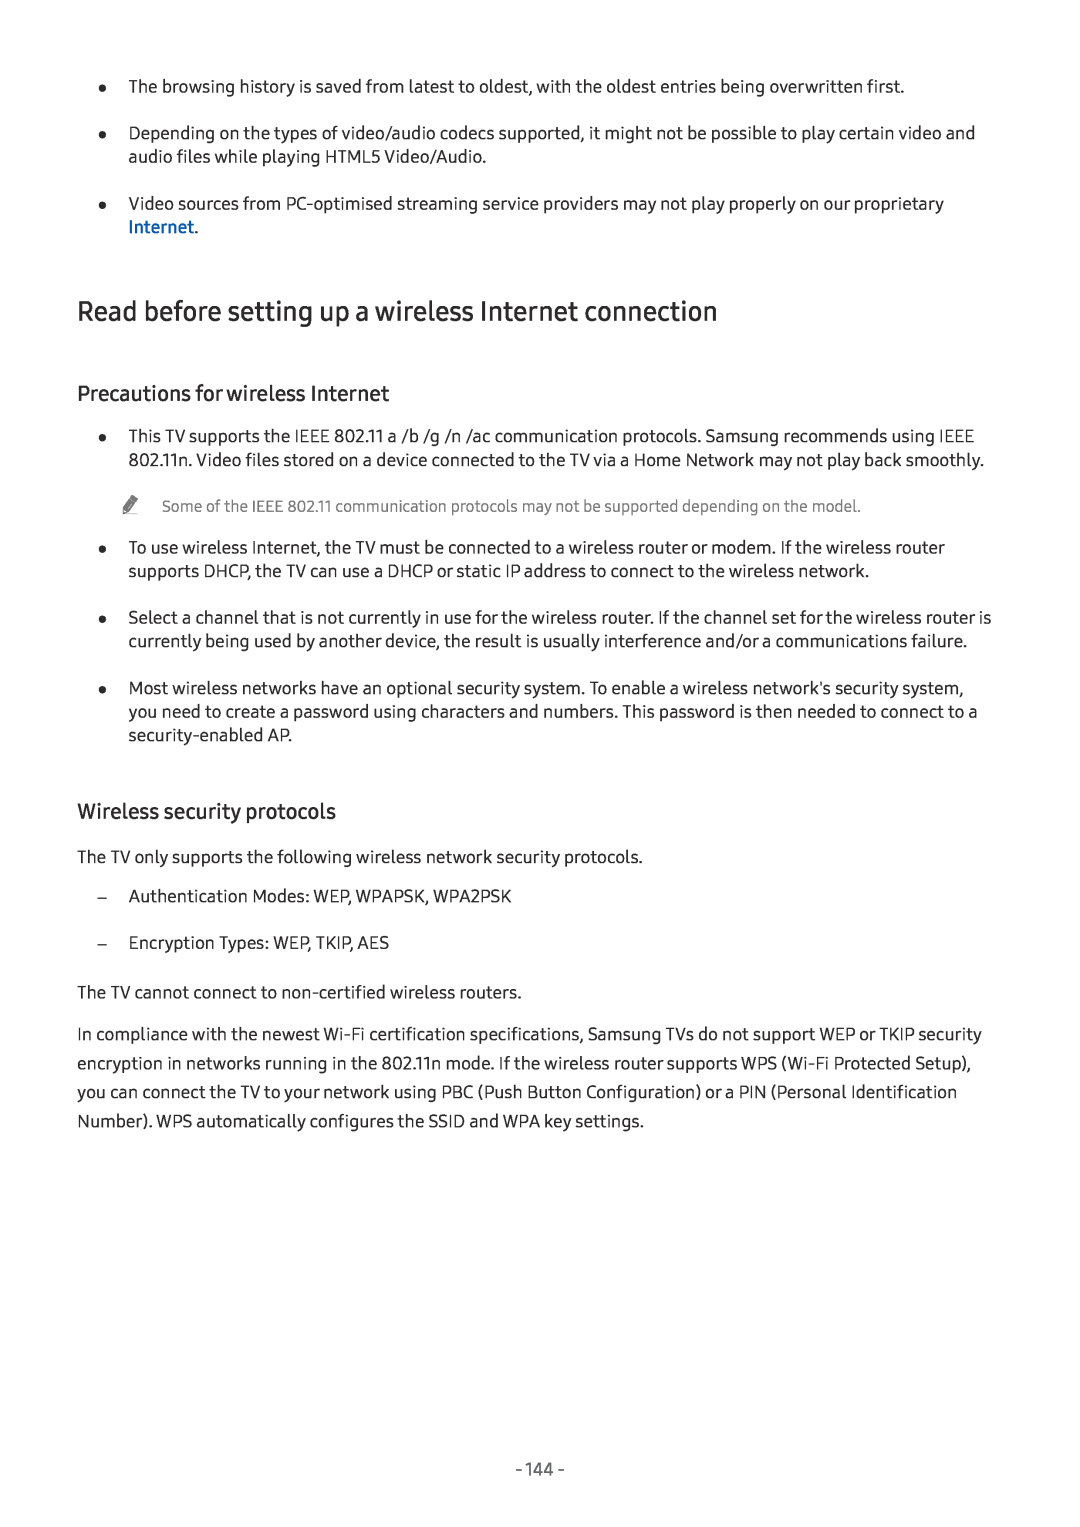 Samsung UE65NU8040TXZG manual Read before setting up a wireless Internet connection, Precautions for wireless Internet 